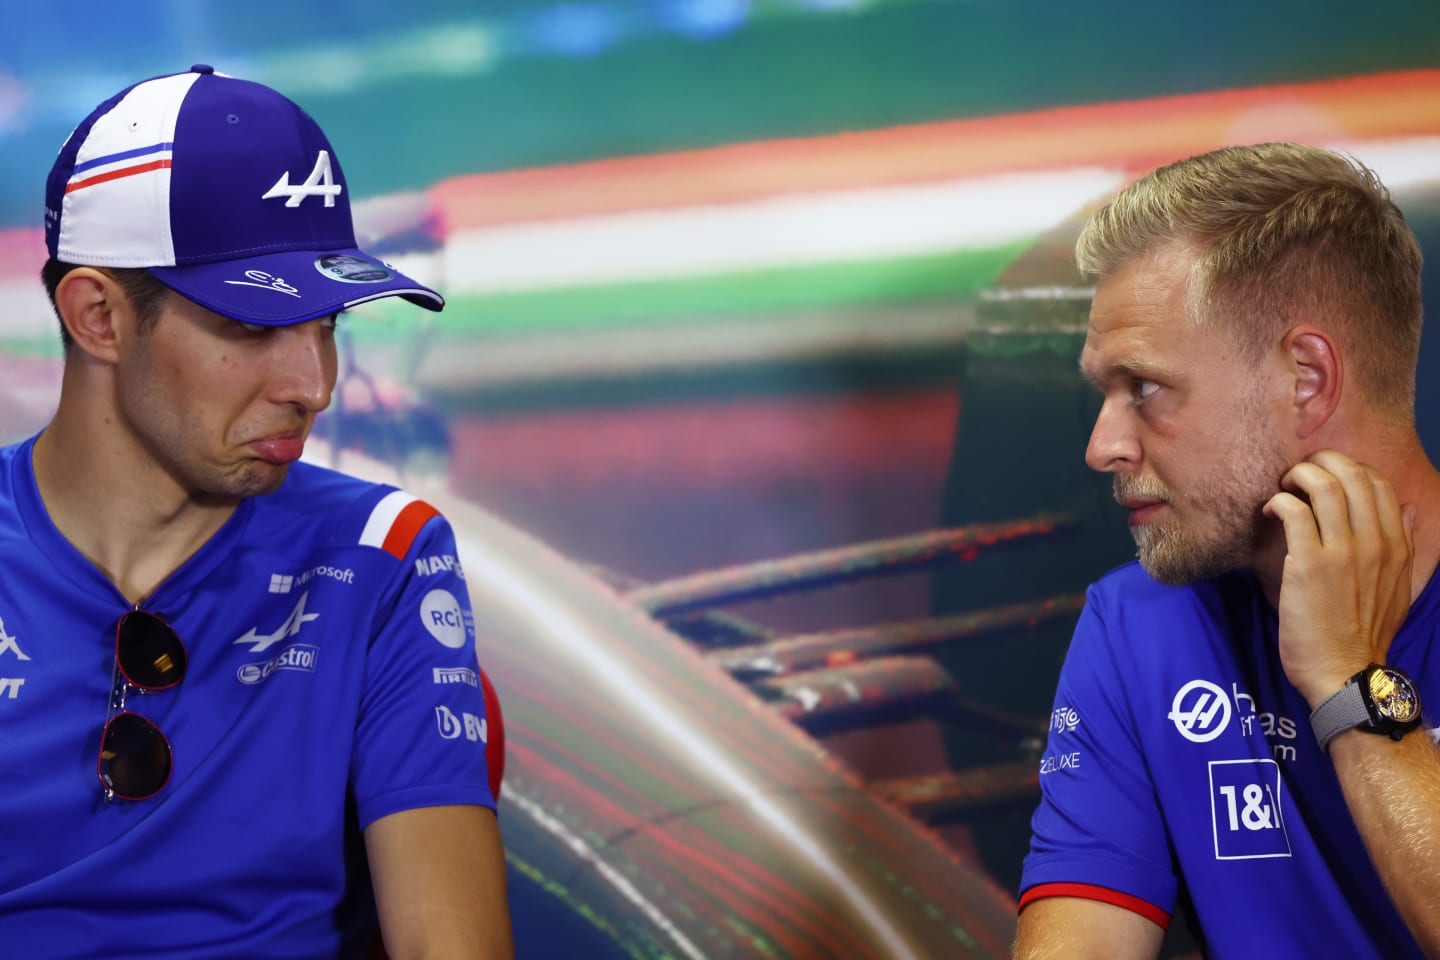 BUDAPEST, HUNGARY - JULY 28: Esteban Ocon of France and Alpine F1 and Kevin Magnussen of Denmark and Haas F1 talk in the Drivers Press Conference during previews ahead of the F1 Grand Prix of Hungary at Hungaroring on July 28, 2022 in Budapest, Hungary. (Photo by Bryn Lennon/Getty Images)